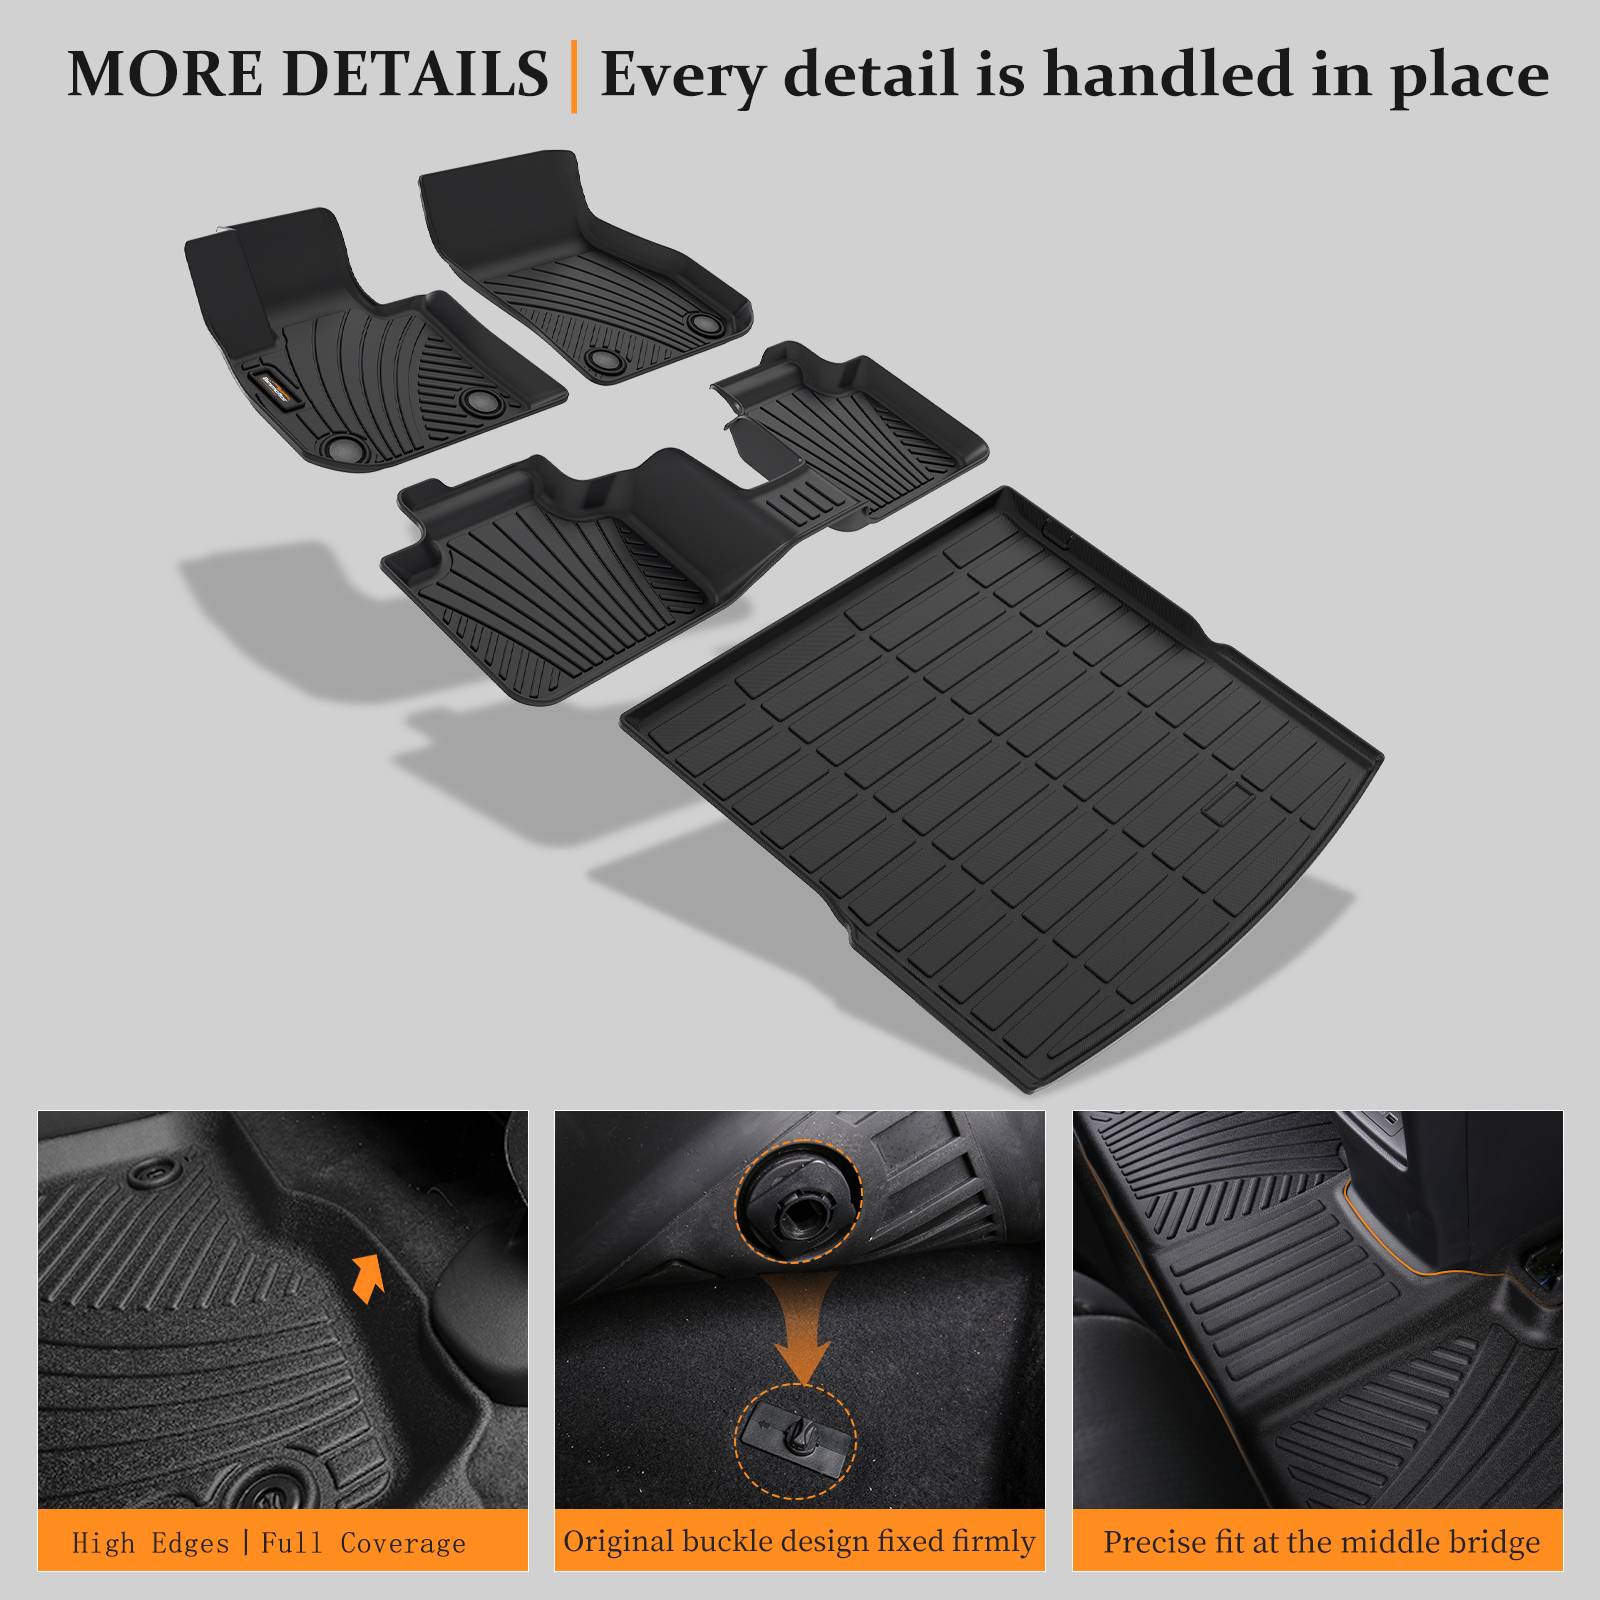 Binmotor-Floor Mats for Toyota bZ4X All Weather Protection Custom Fit TPE Heavy Duty Non-Slip Automotive Floor Liners Fits Front & 2nd Row Full Set Accessories, Black（compatible year 2023）